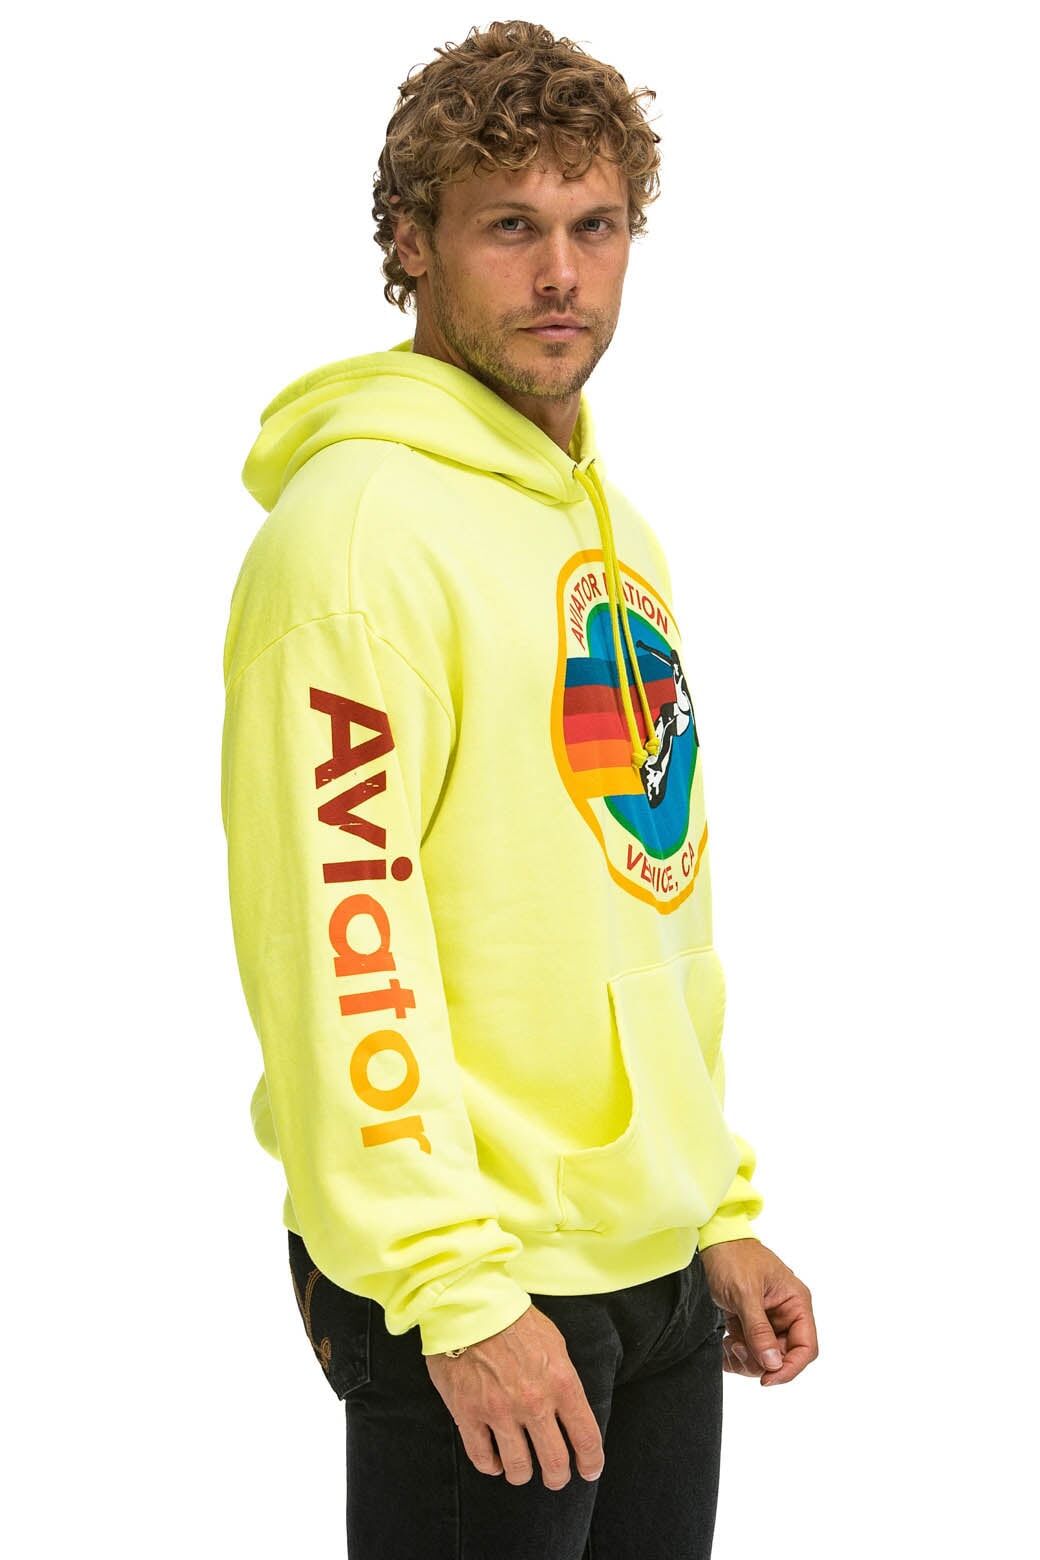 AVIATOR NATION RELAXED PULLOVER HOODIE - NEON YELLOW Hoodie Aviator Nation 